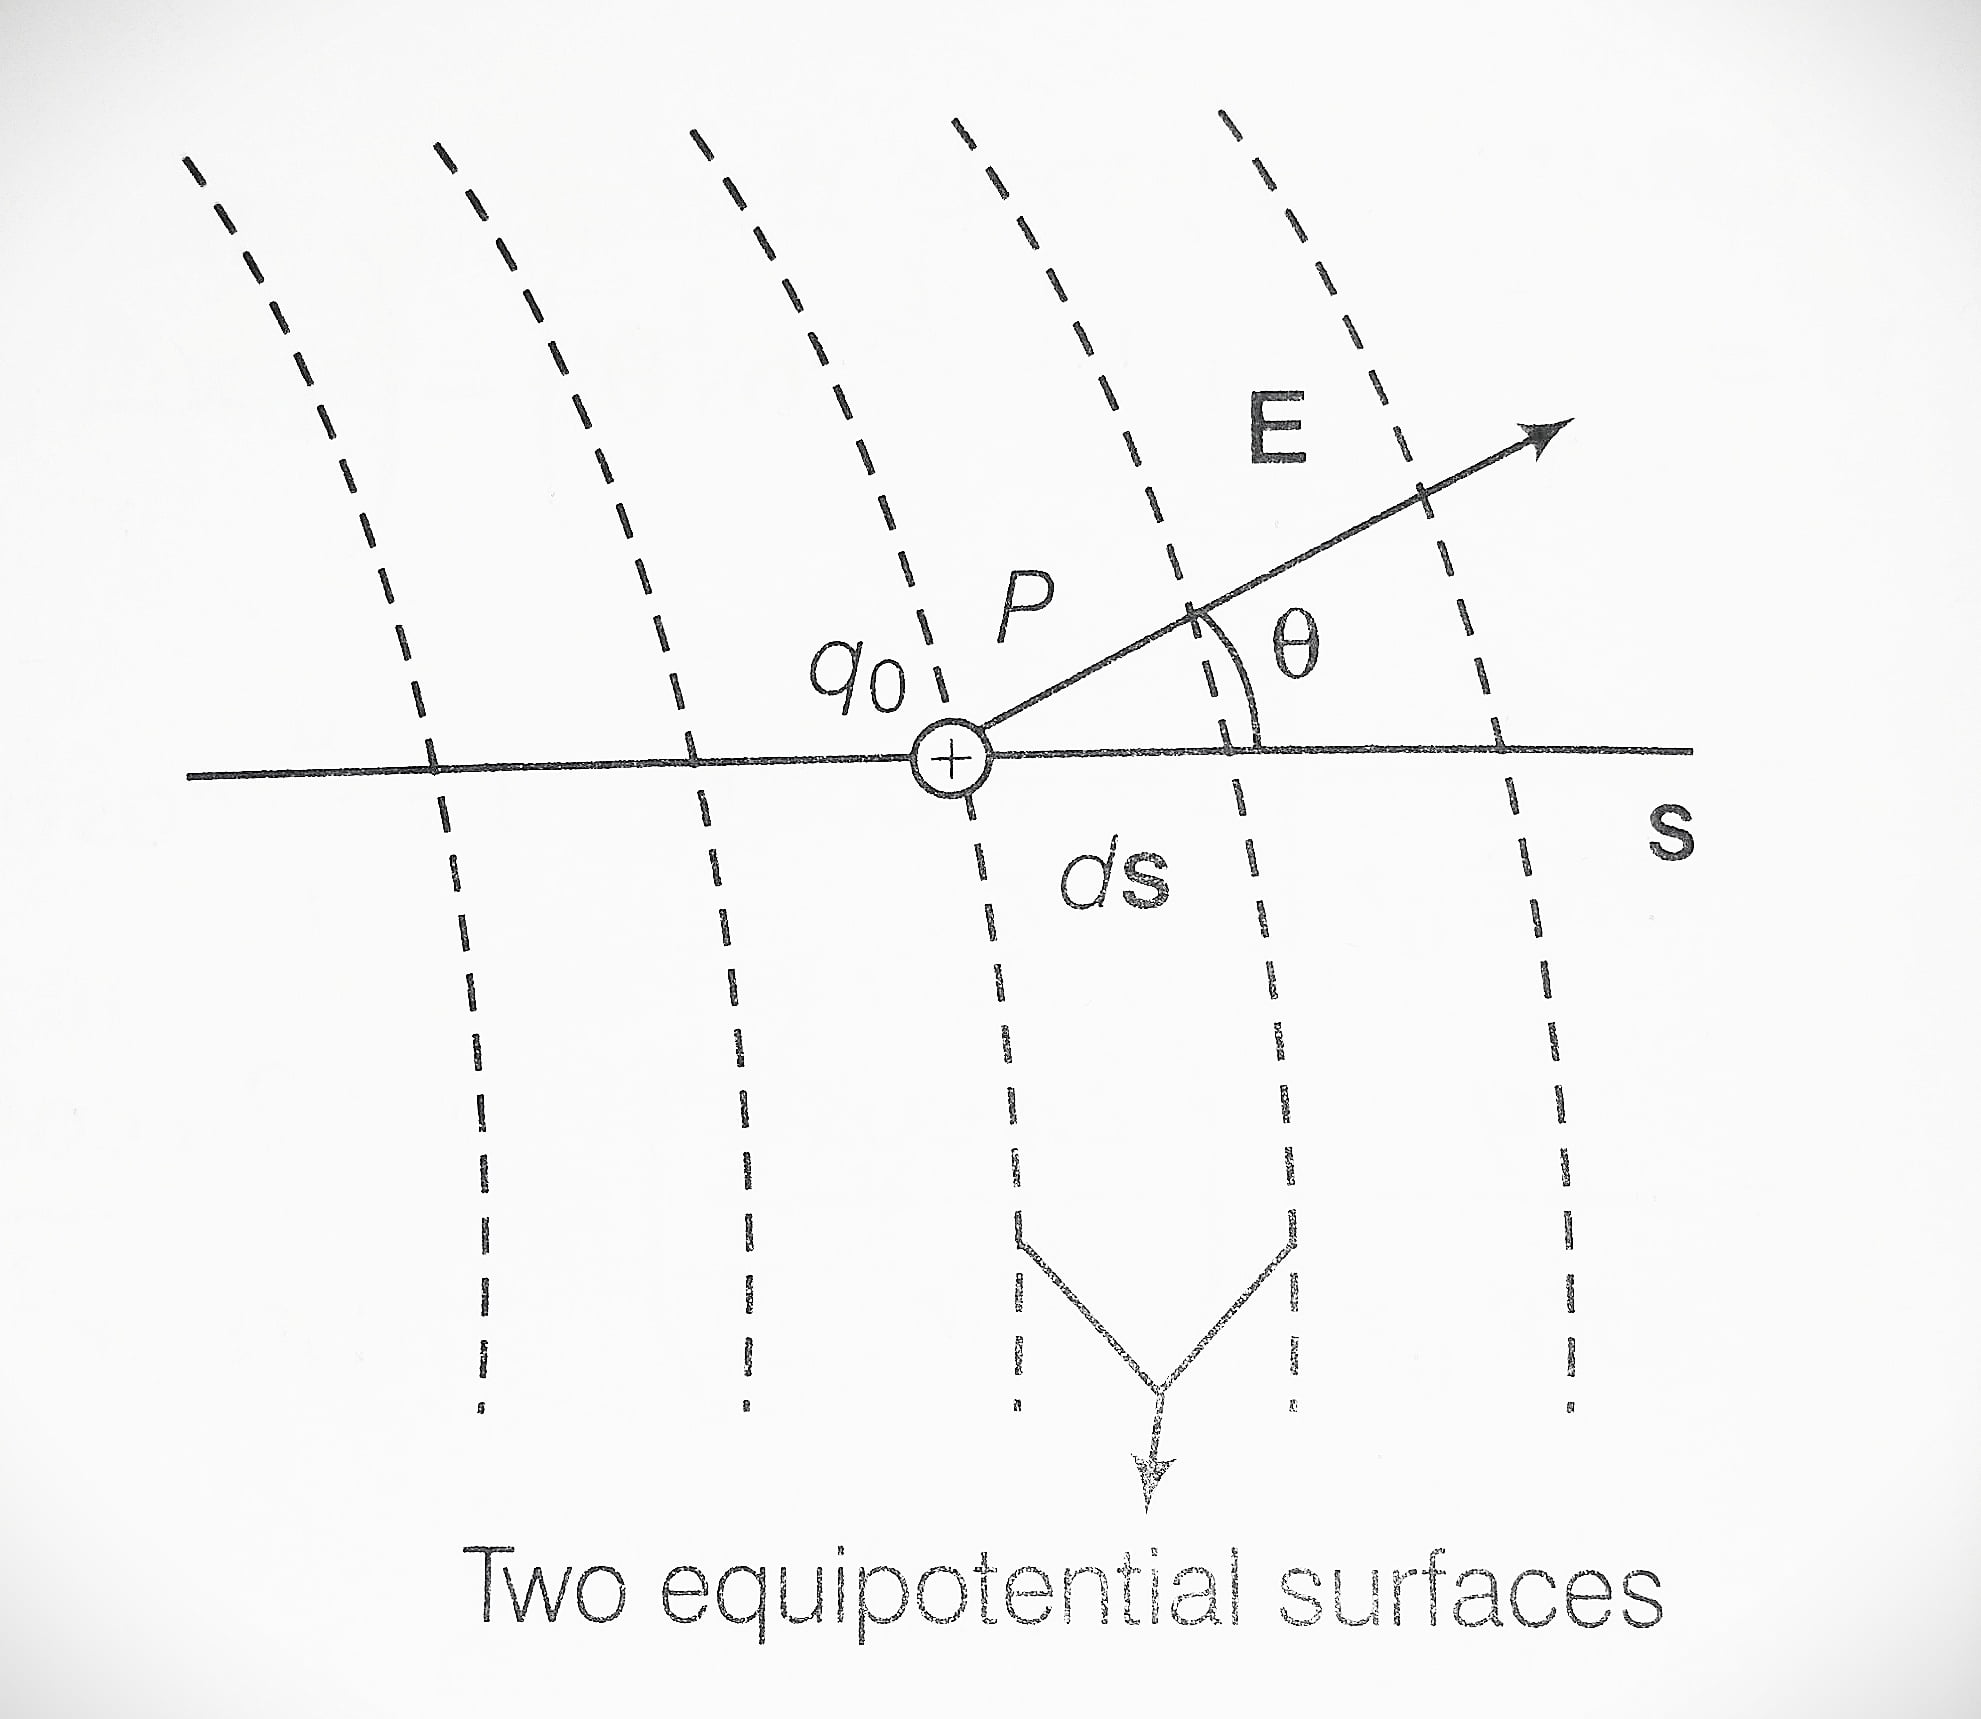 Relation between the electric field and electric potential